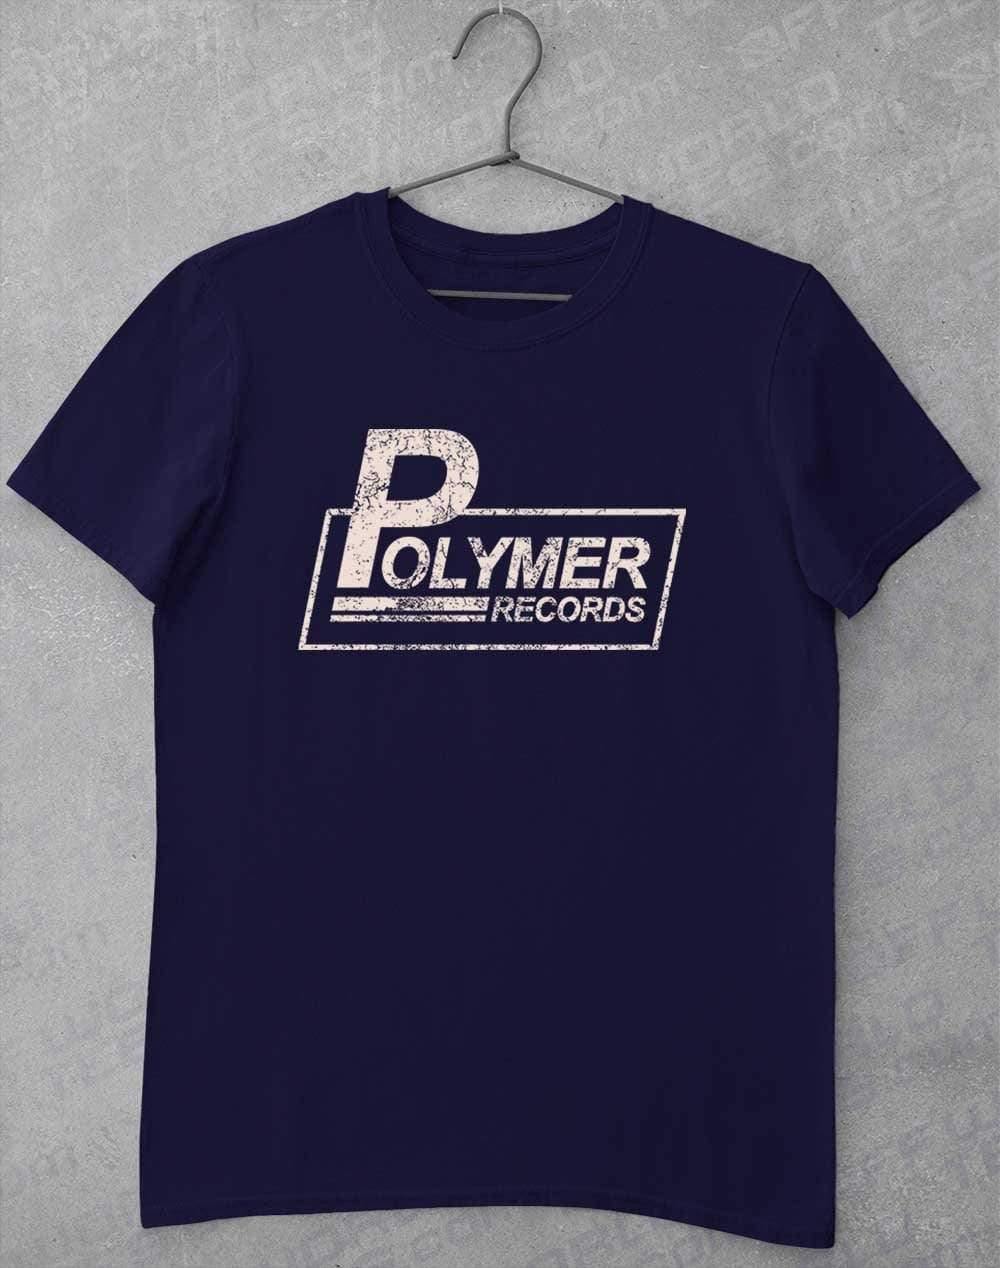 Polymer Records Distressed Logo T-Shirt S / Navy  - Off World Tees